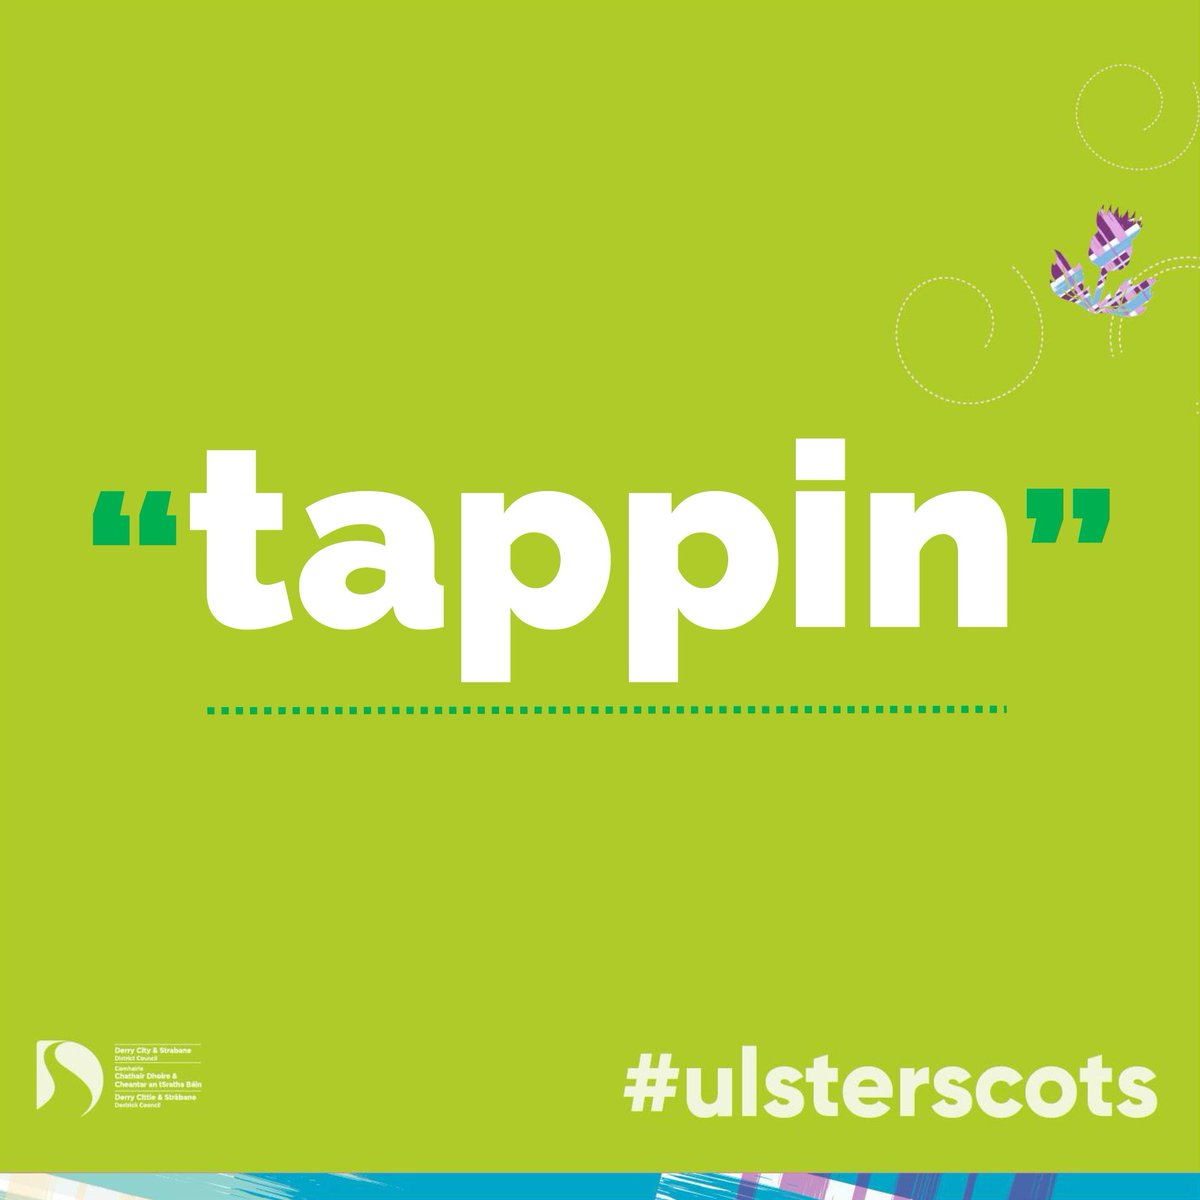 Tappin (noun): a tuft or crest of feathers on a bird’s head. Also refers to a hair style adopted by men in the first half of the 19th century in which the hair was combed up to form a crest or ridge on the top of the head (Source: Dictionars o the Scots Leid) #Scots #UlsterScots